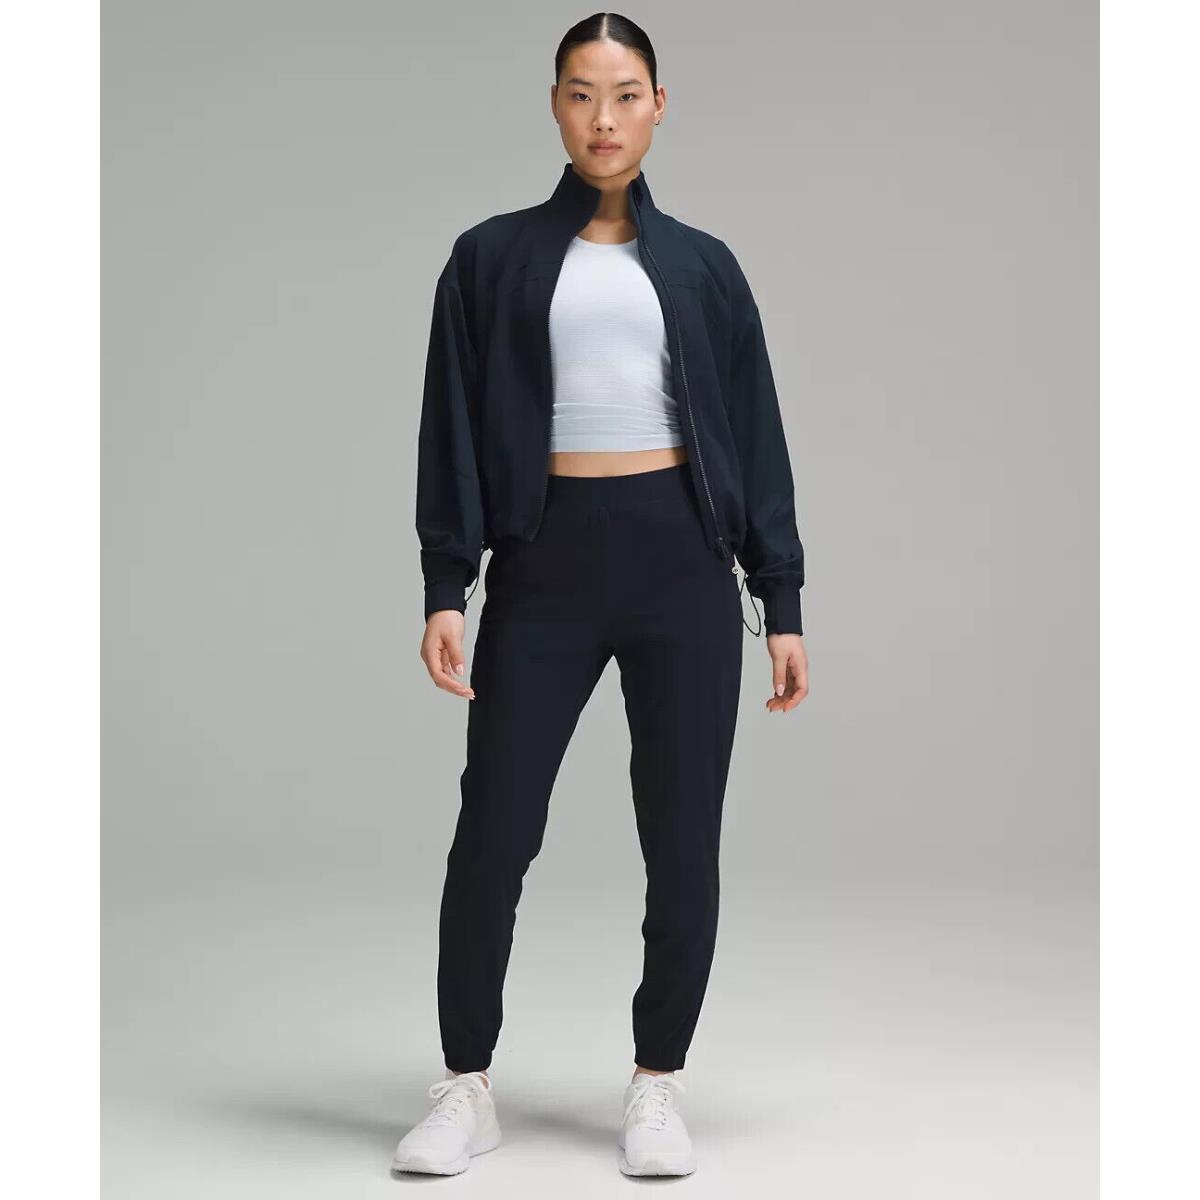 Lululemon Adapted State High-rise Jogger True Navy Size 0. LW5CVMS